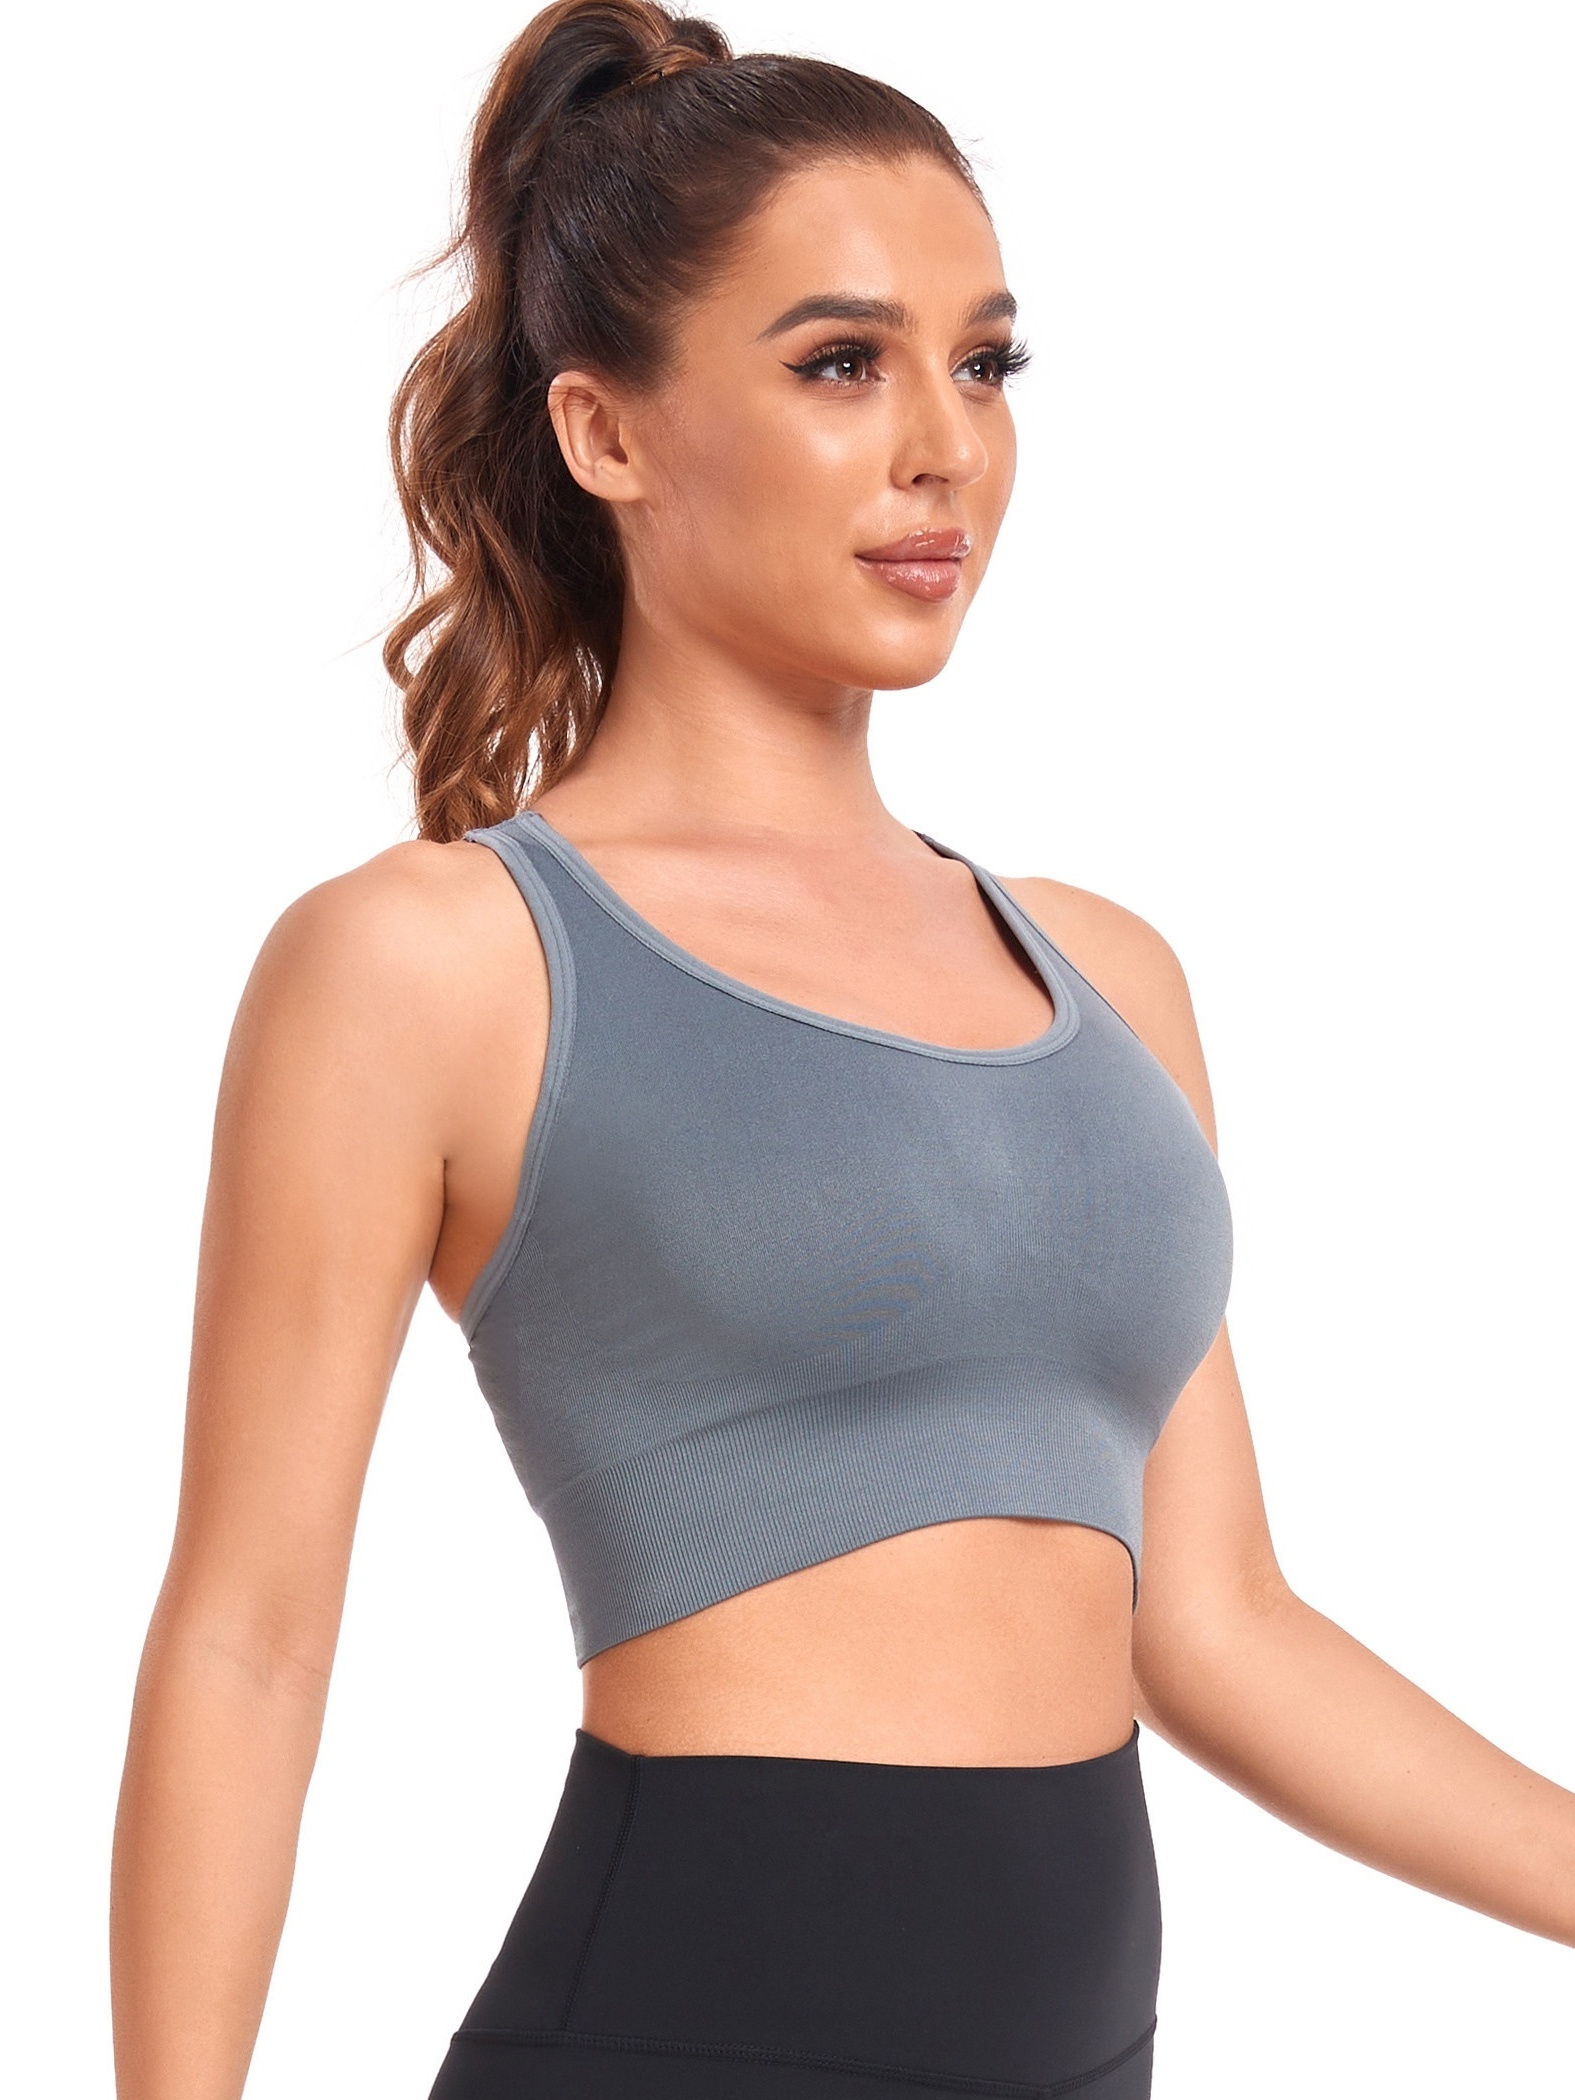 FUTATA Women's Sports Bra, Shock Resistant Low Impact Turtleneck Long Cord  With Removable Padding For Gym Pilates Dancing Jogging Workout